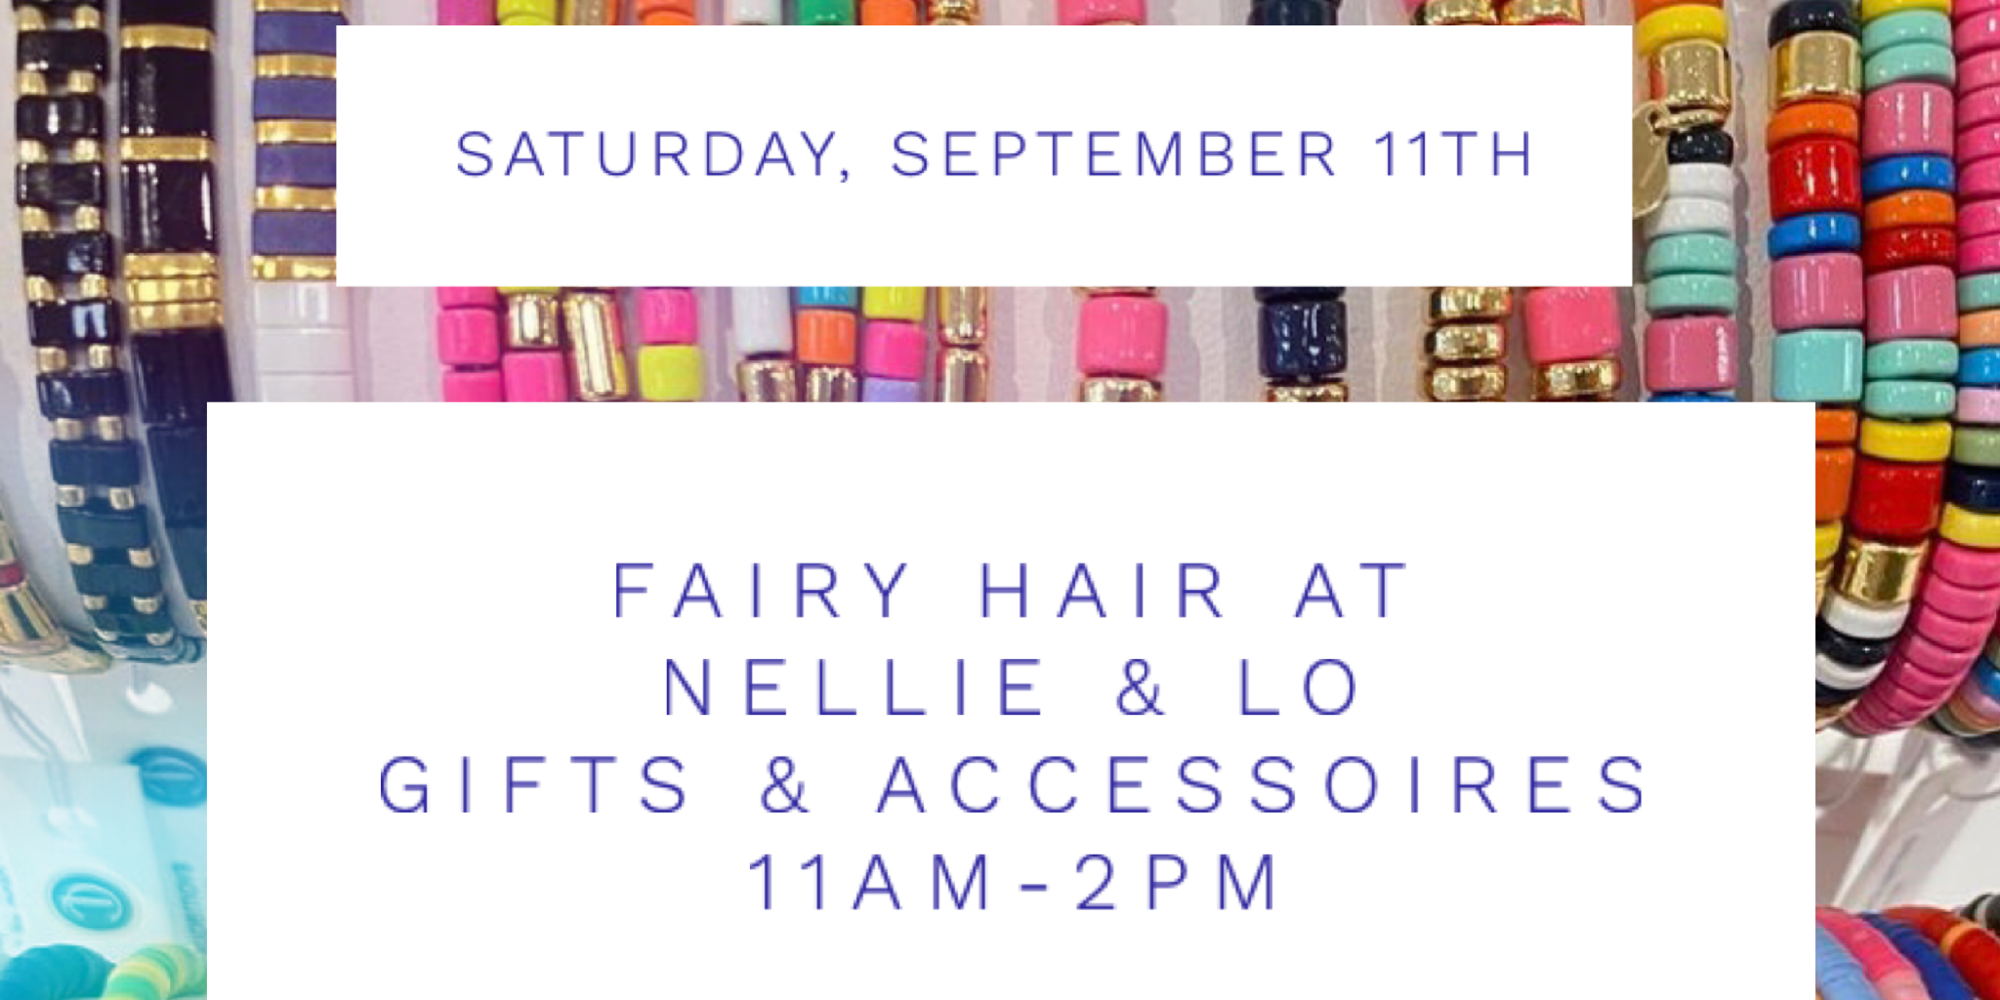 Fairy Hair at Nellie & Lo promotional image